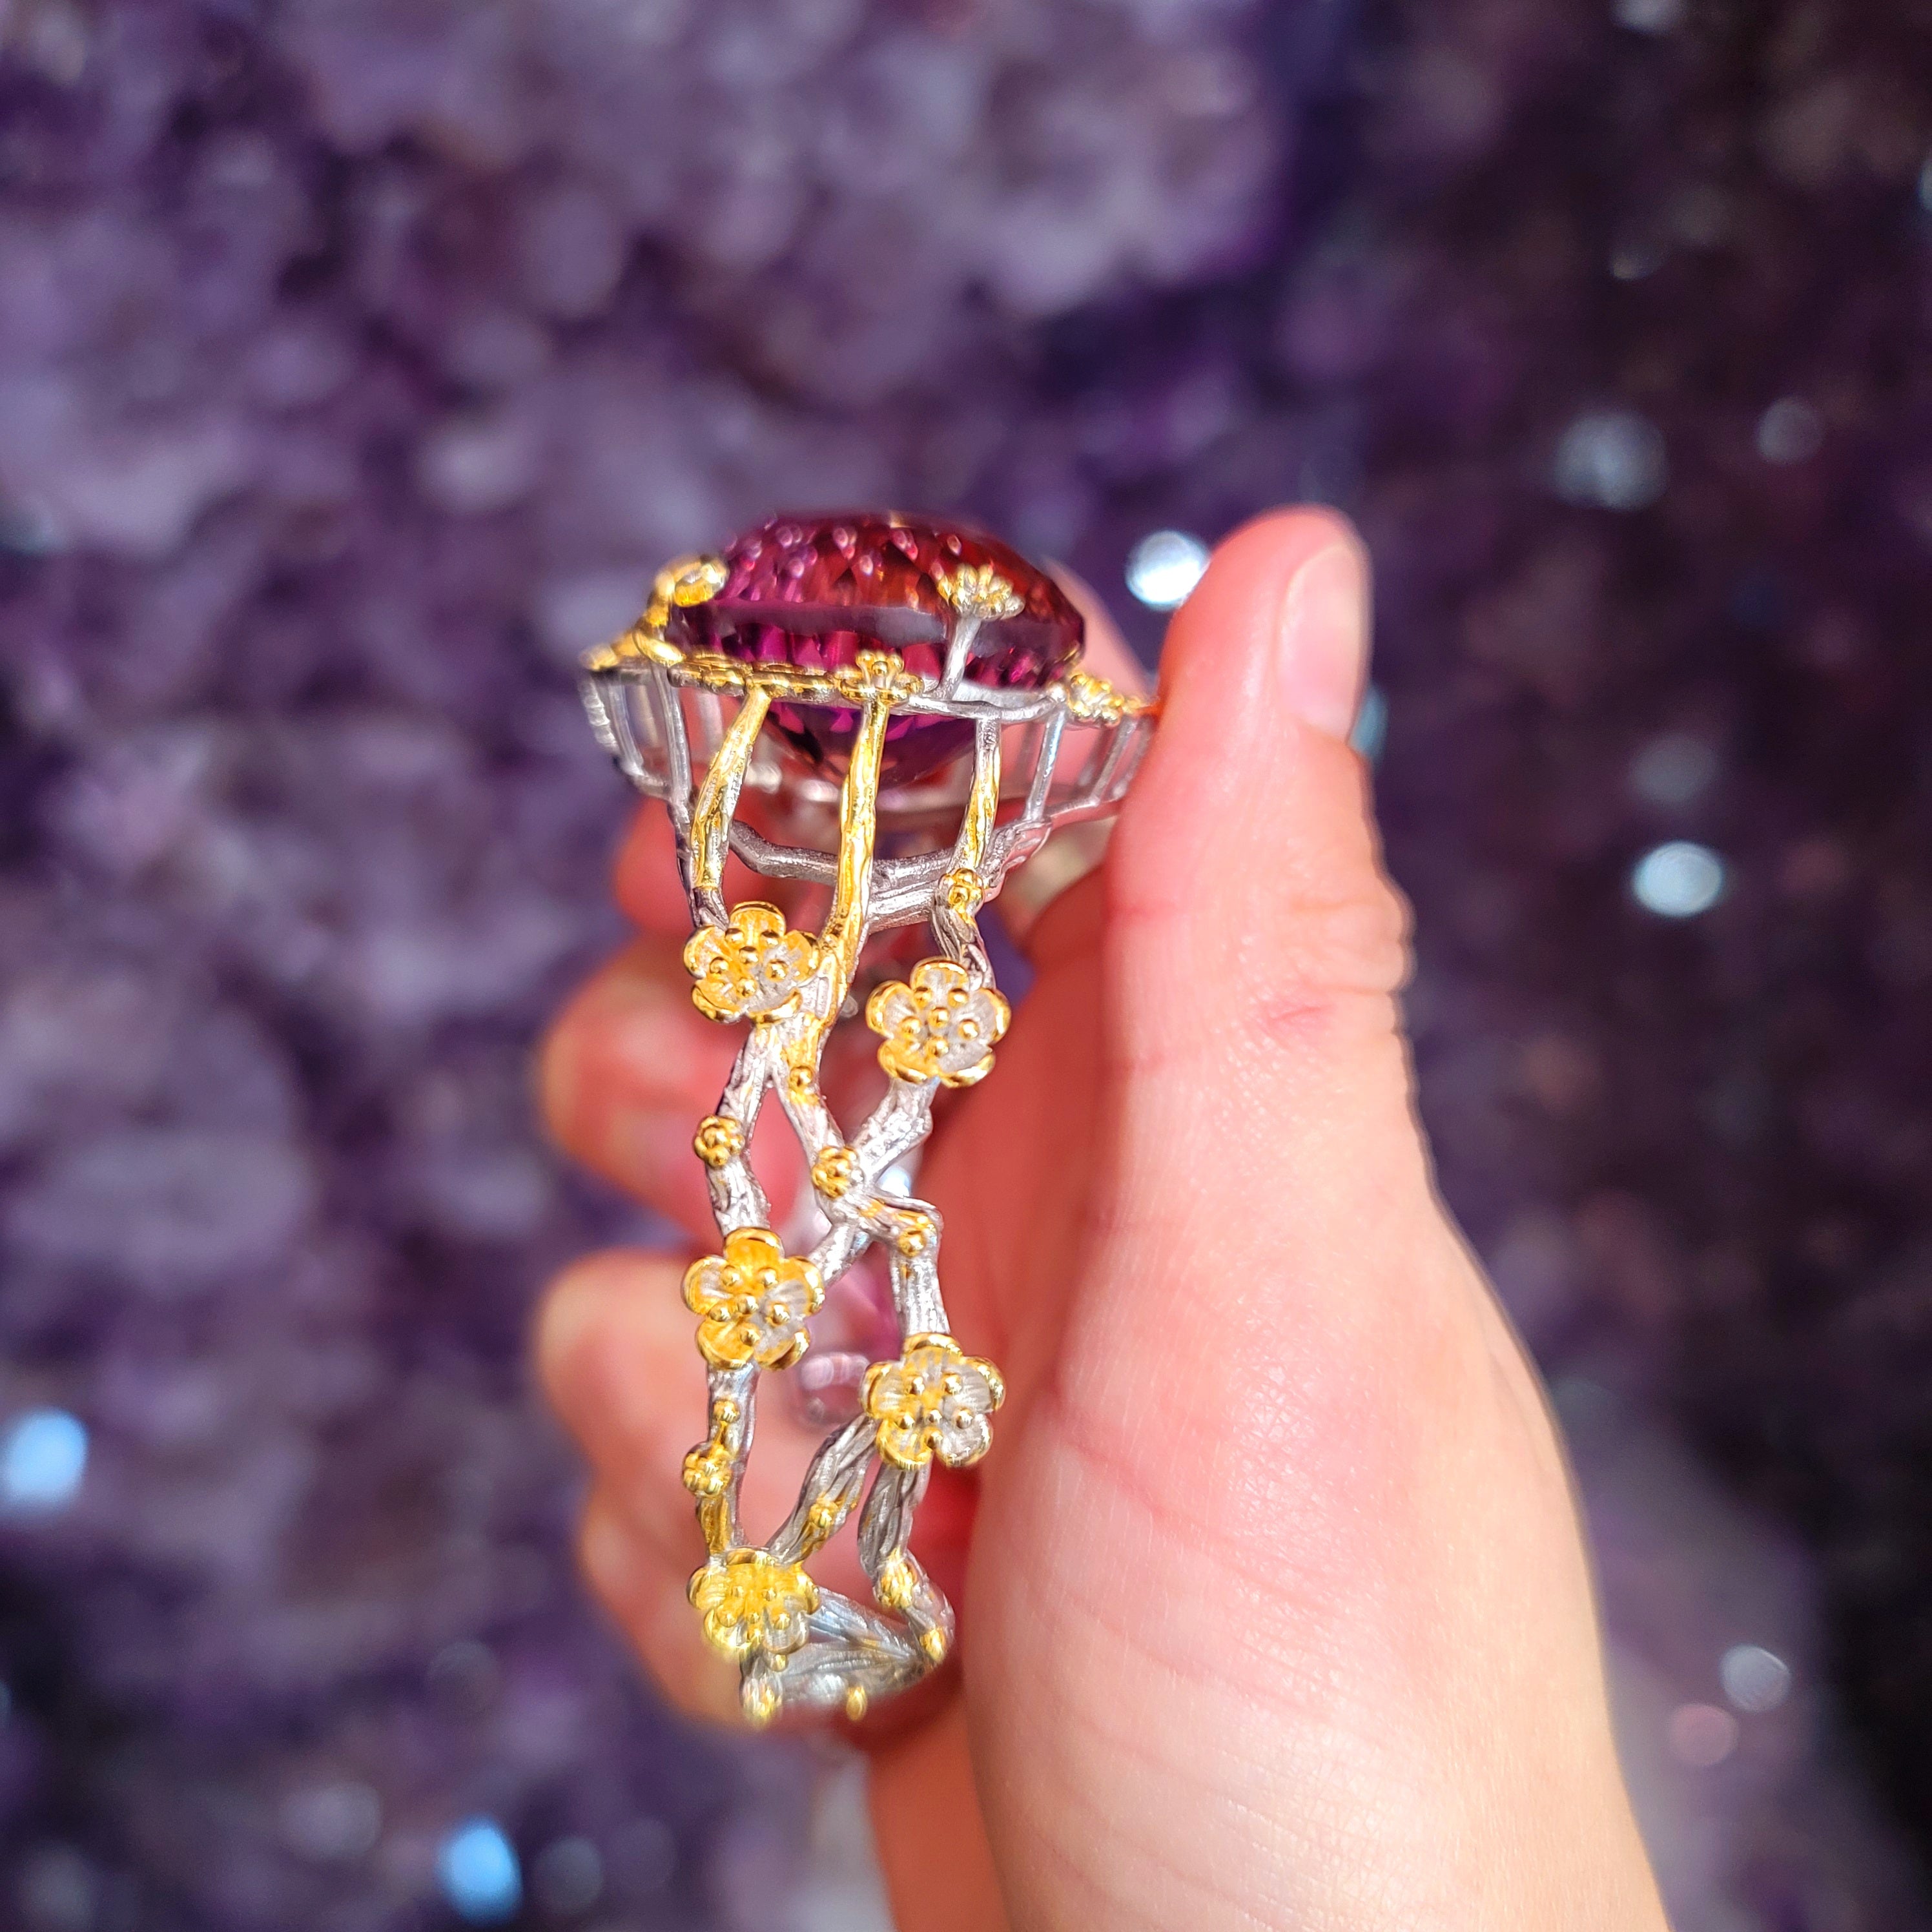 Ametrine Enchanted Cuff Bracelet for Empowerment, Harmony and Transformation into your Dream Life